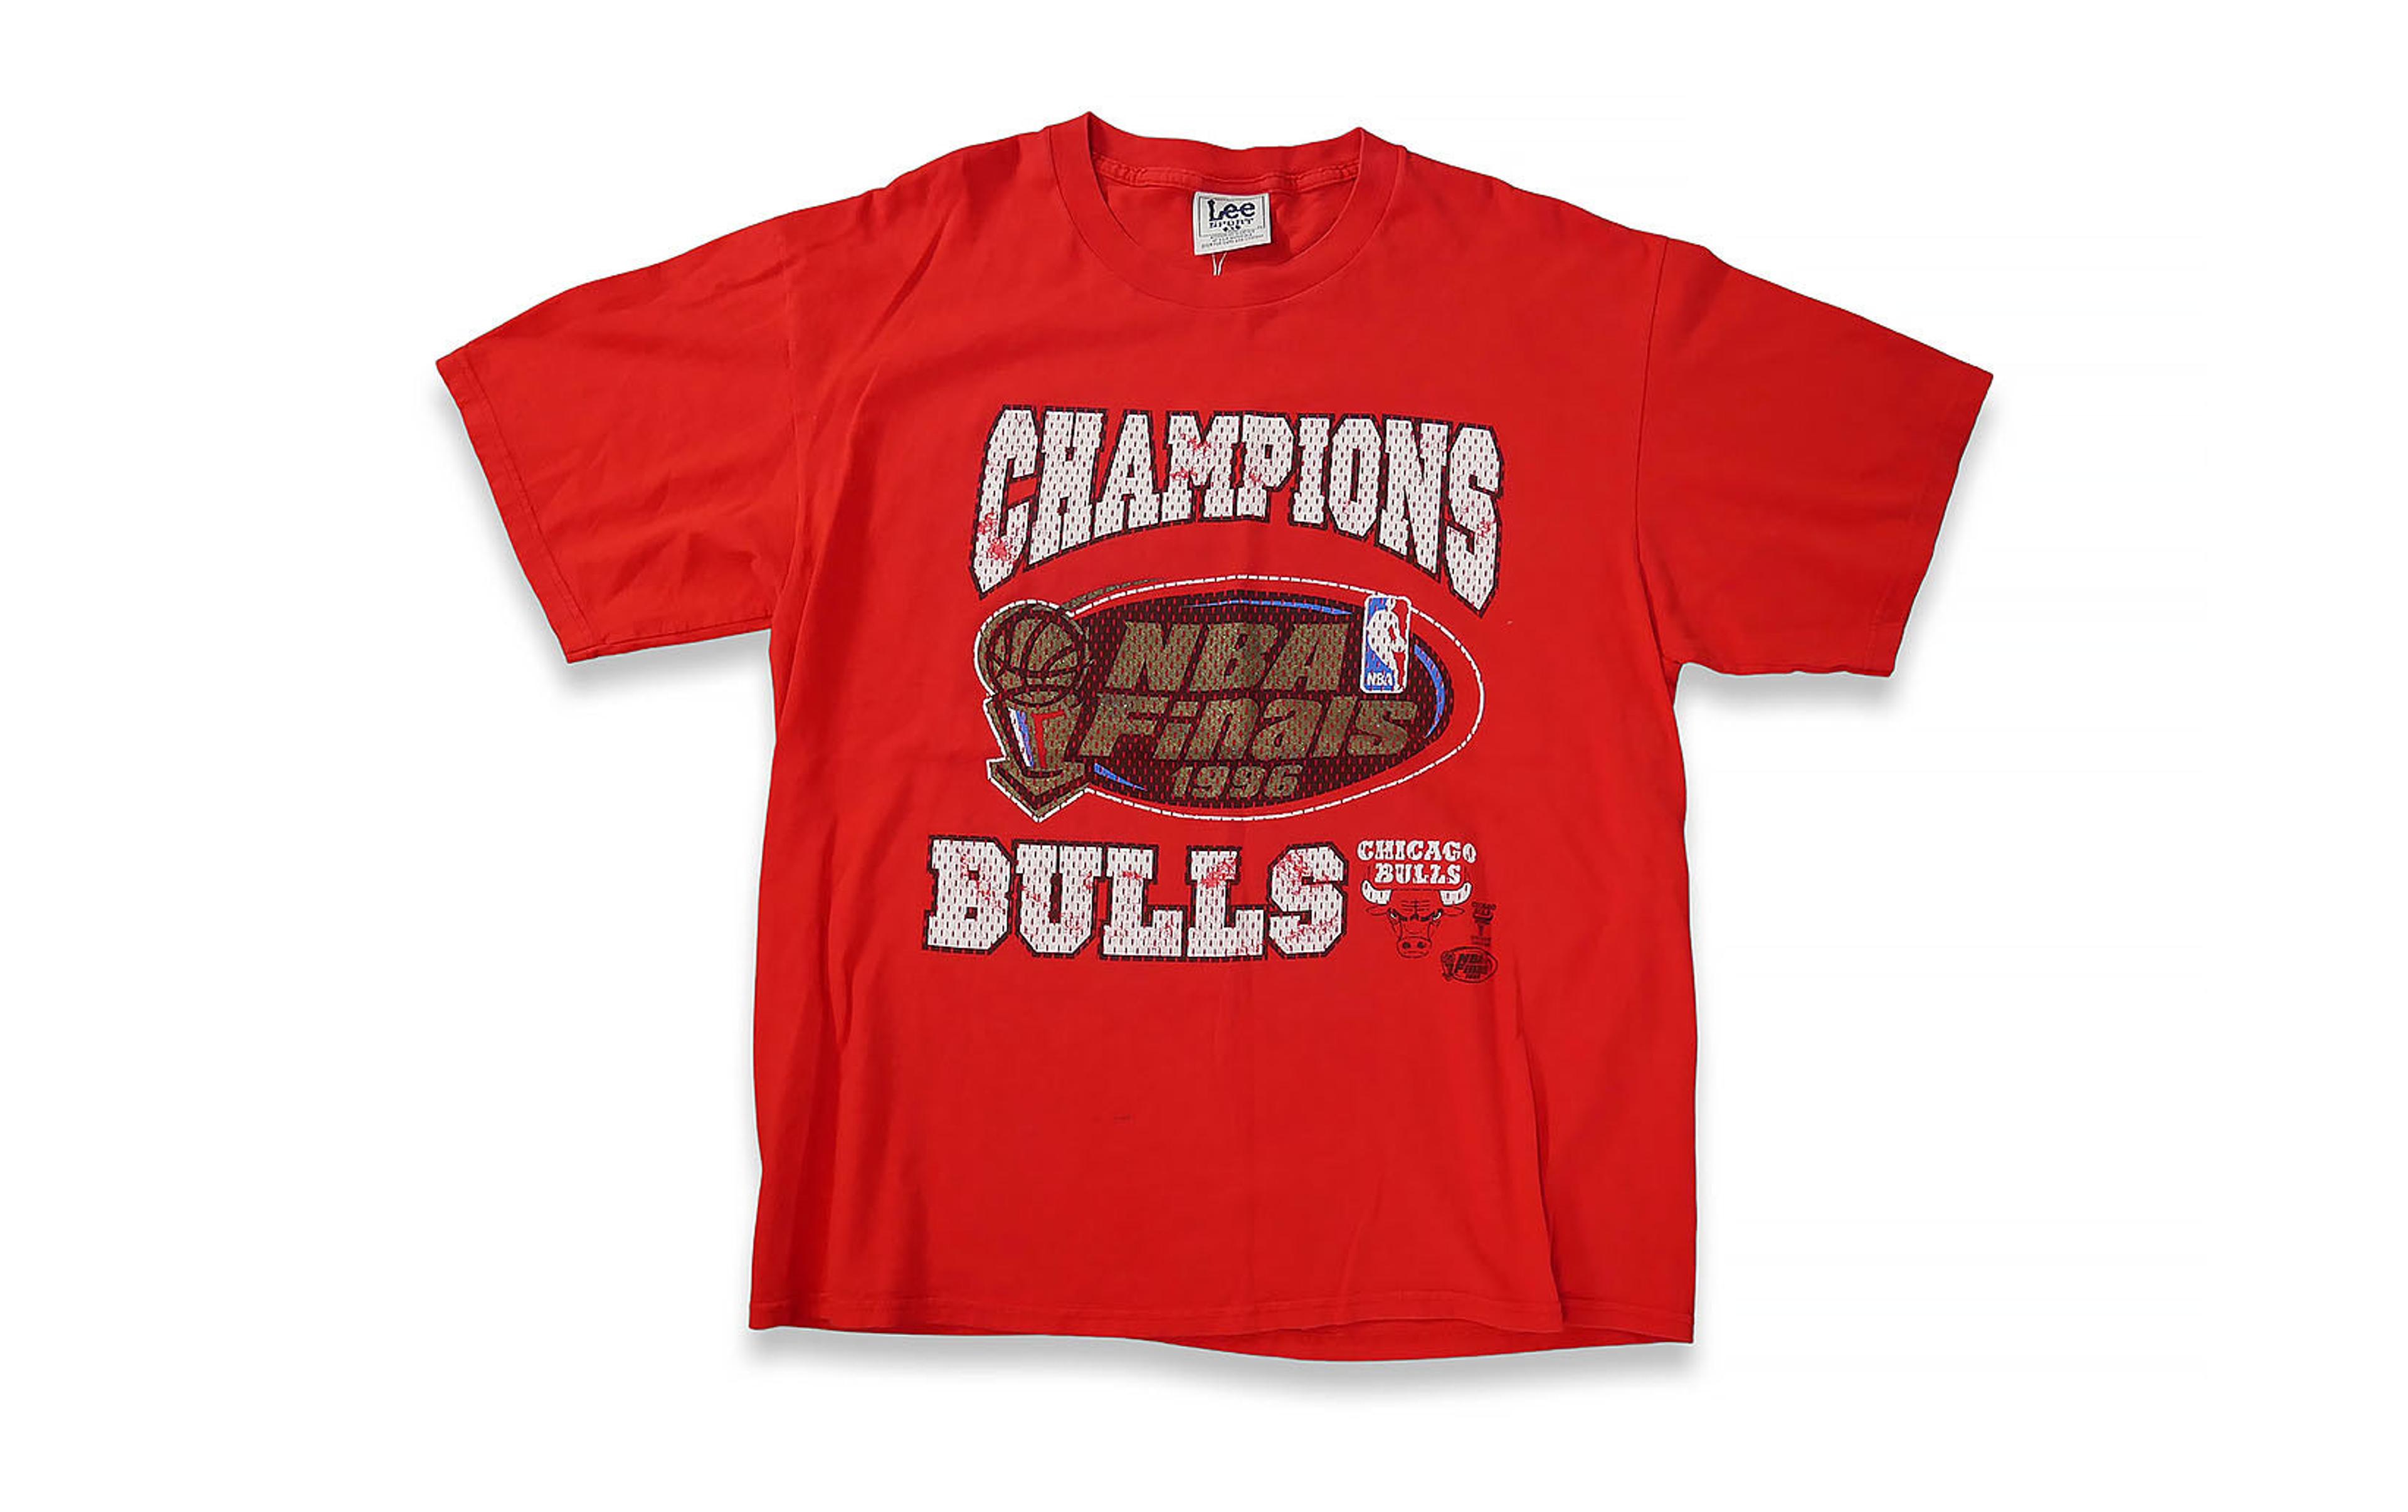 VINTAGE CHICAGO BULLS 6 TIME NBA CHAMPIONS T-SHIRT BY